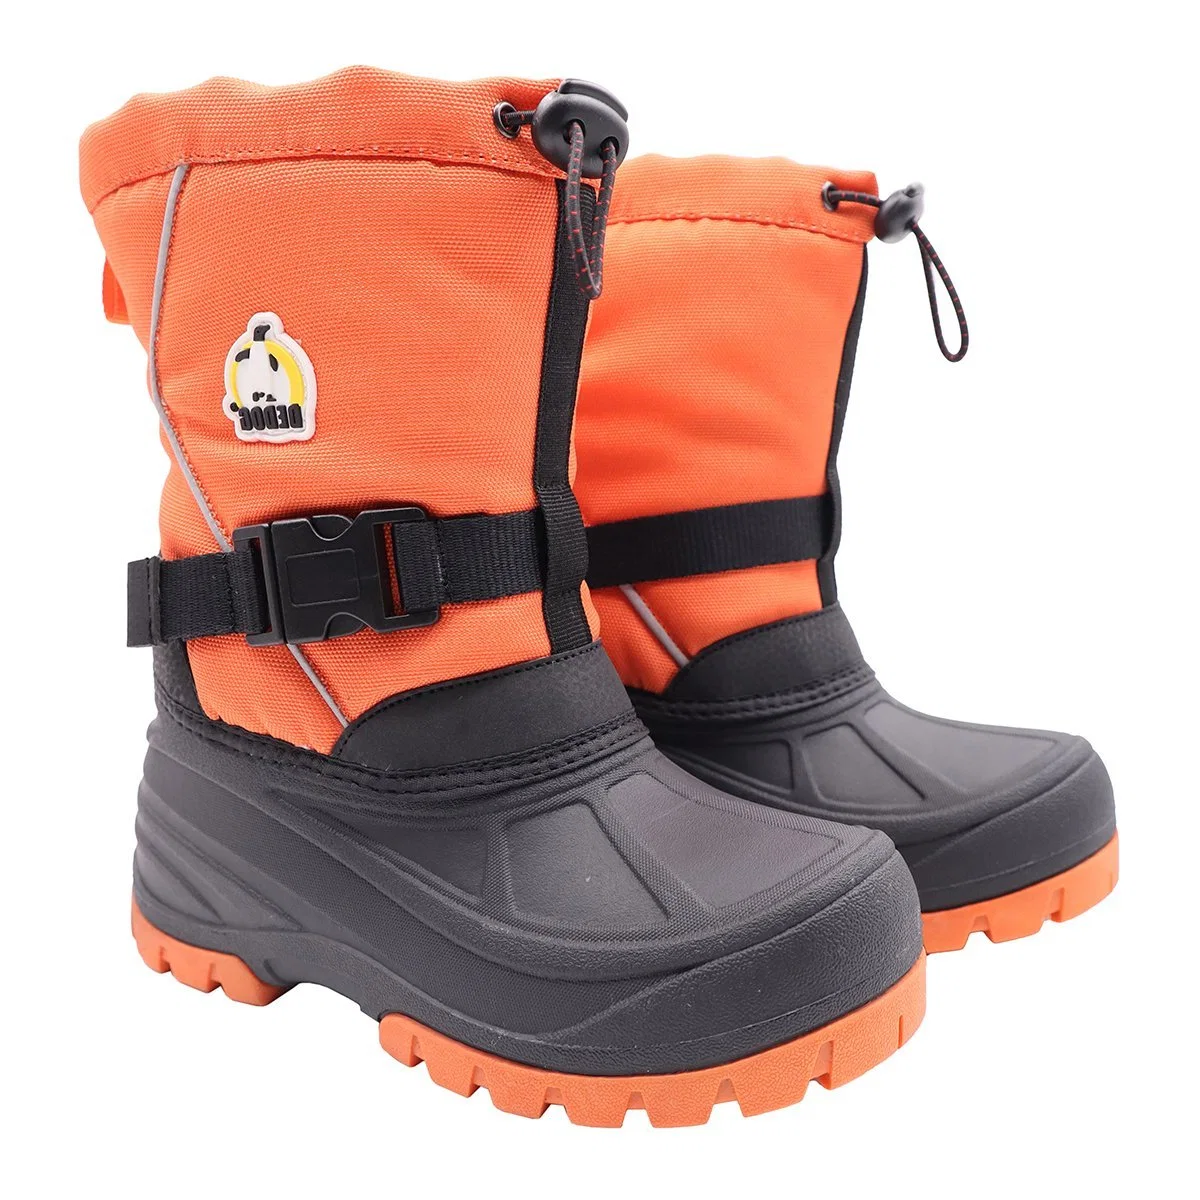 Snow Boots Winter Waterproof Antiskid Boots Outdoor Shoes for Kids